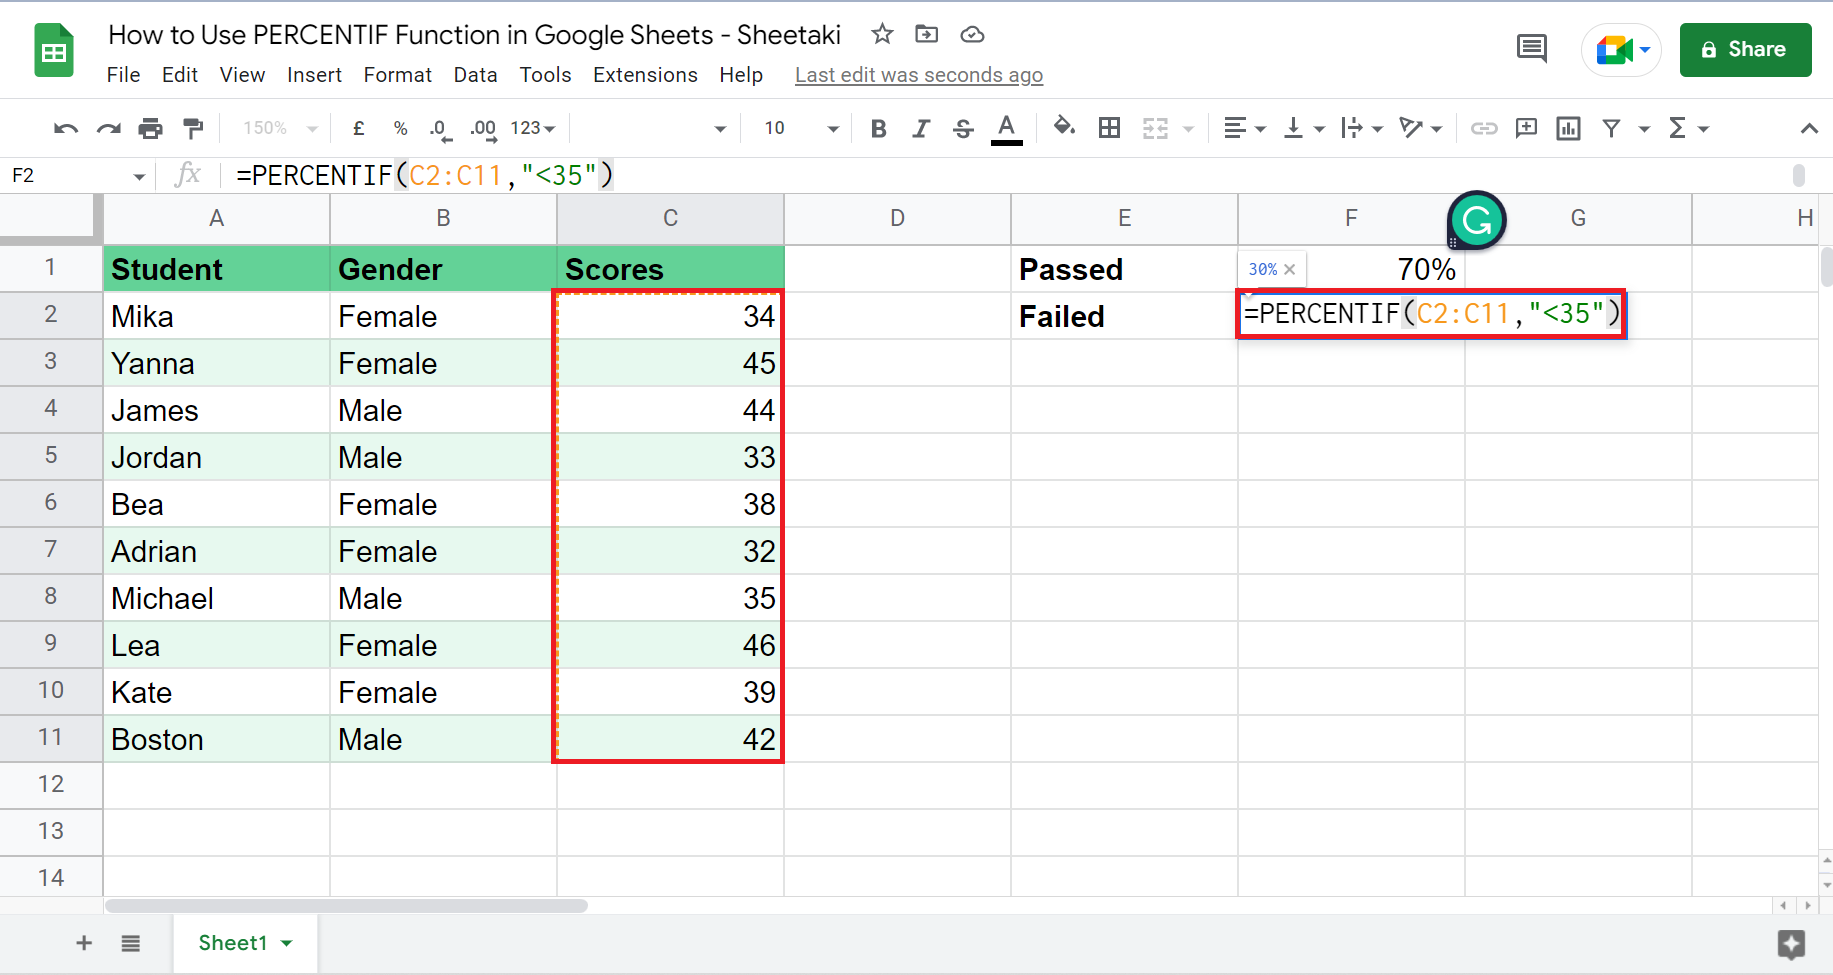 Example for using PERCENTIF function in Google Sheets